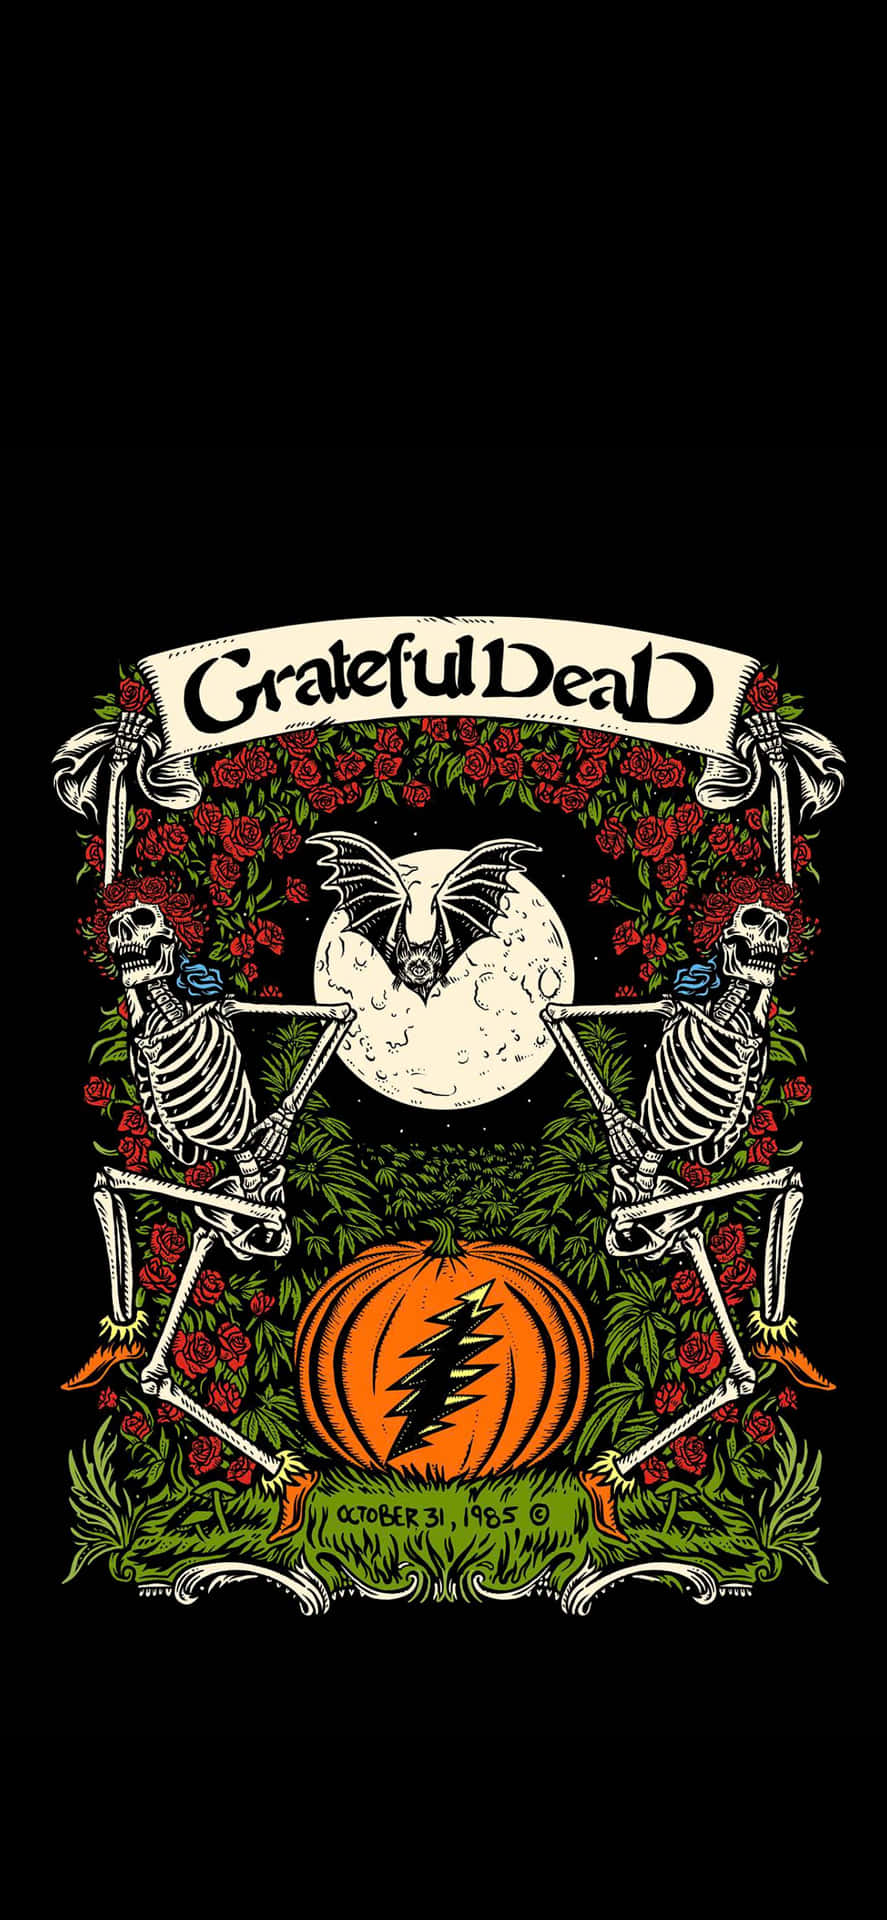 Jam Out With The Grateful Dead On Your Phone Wallpaper